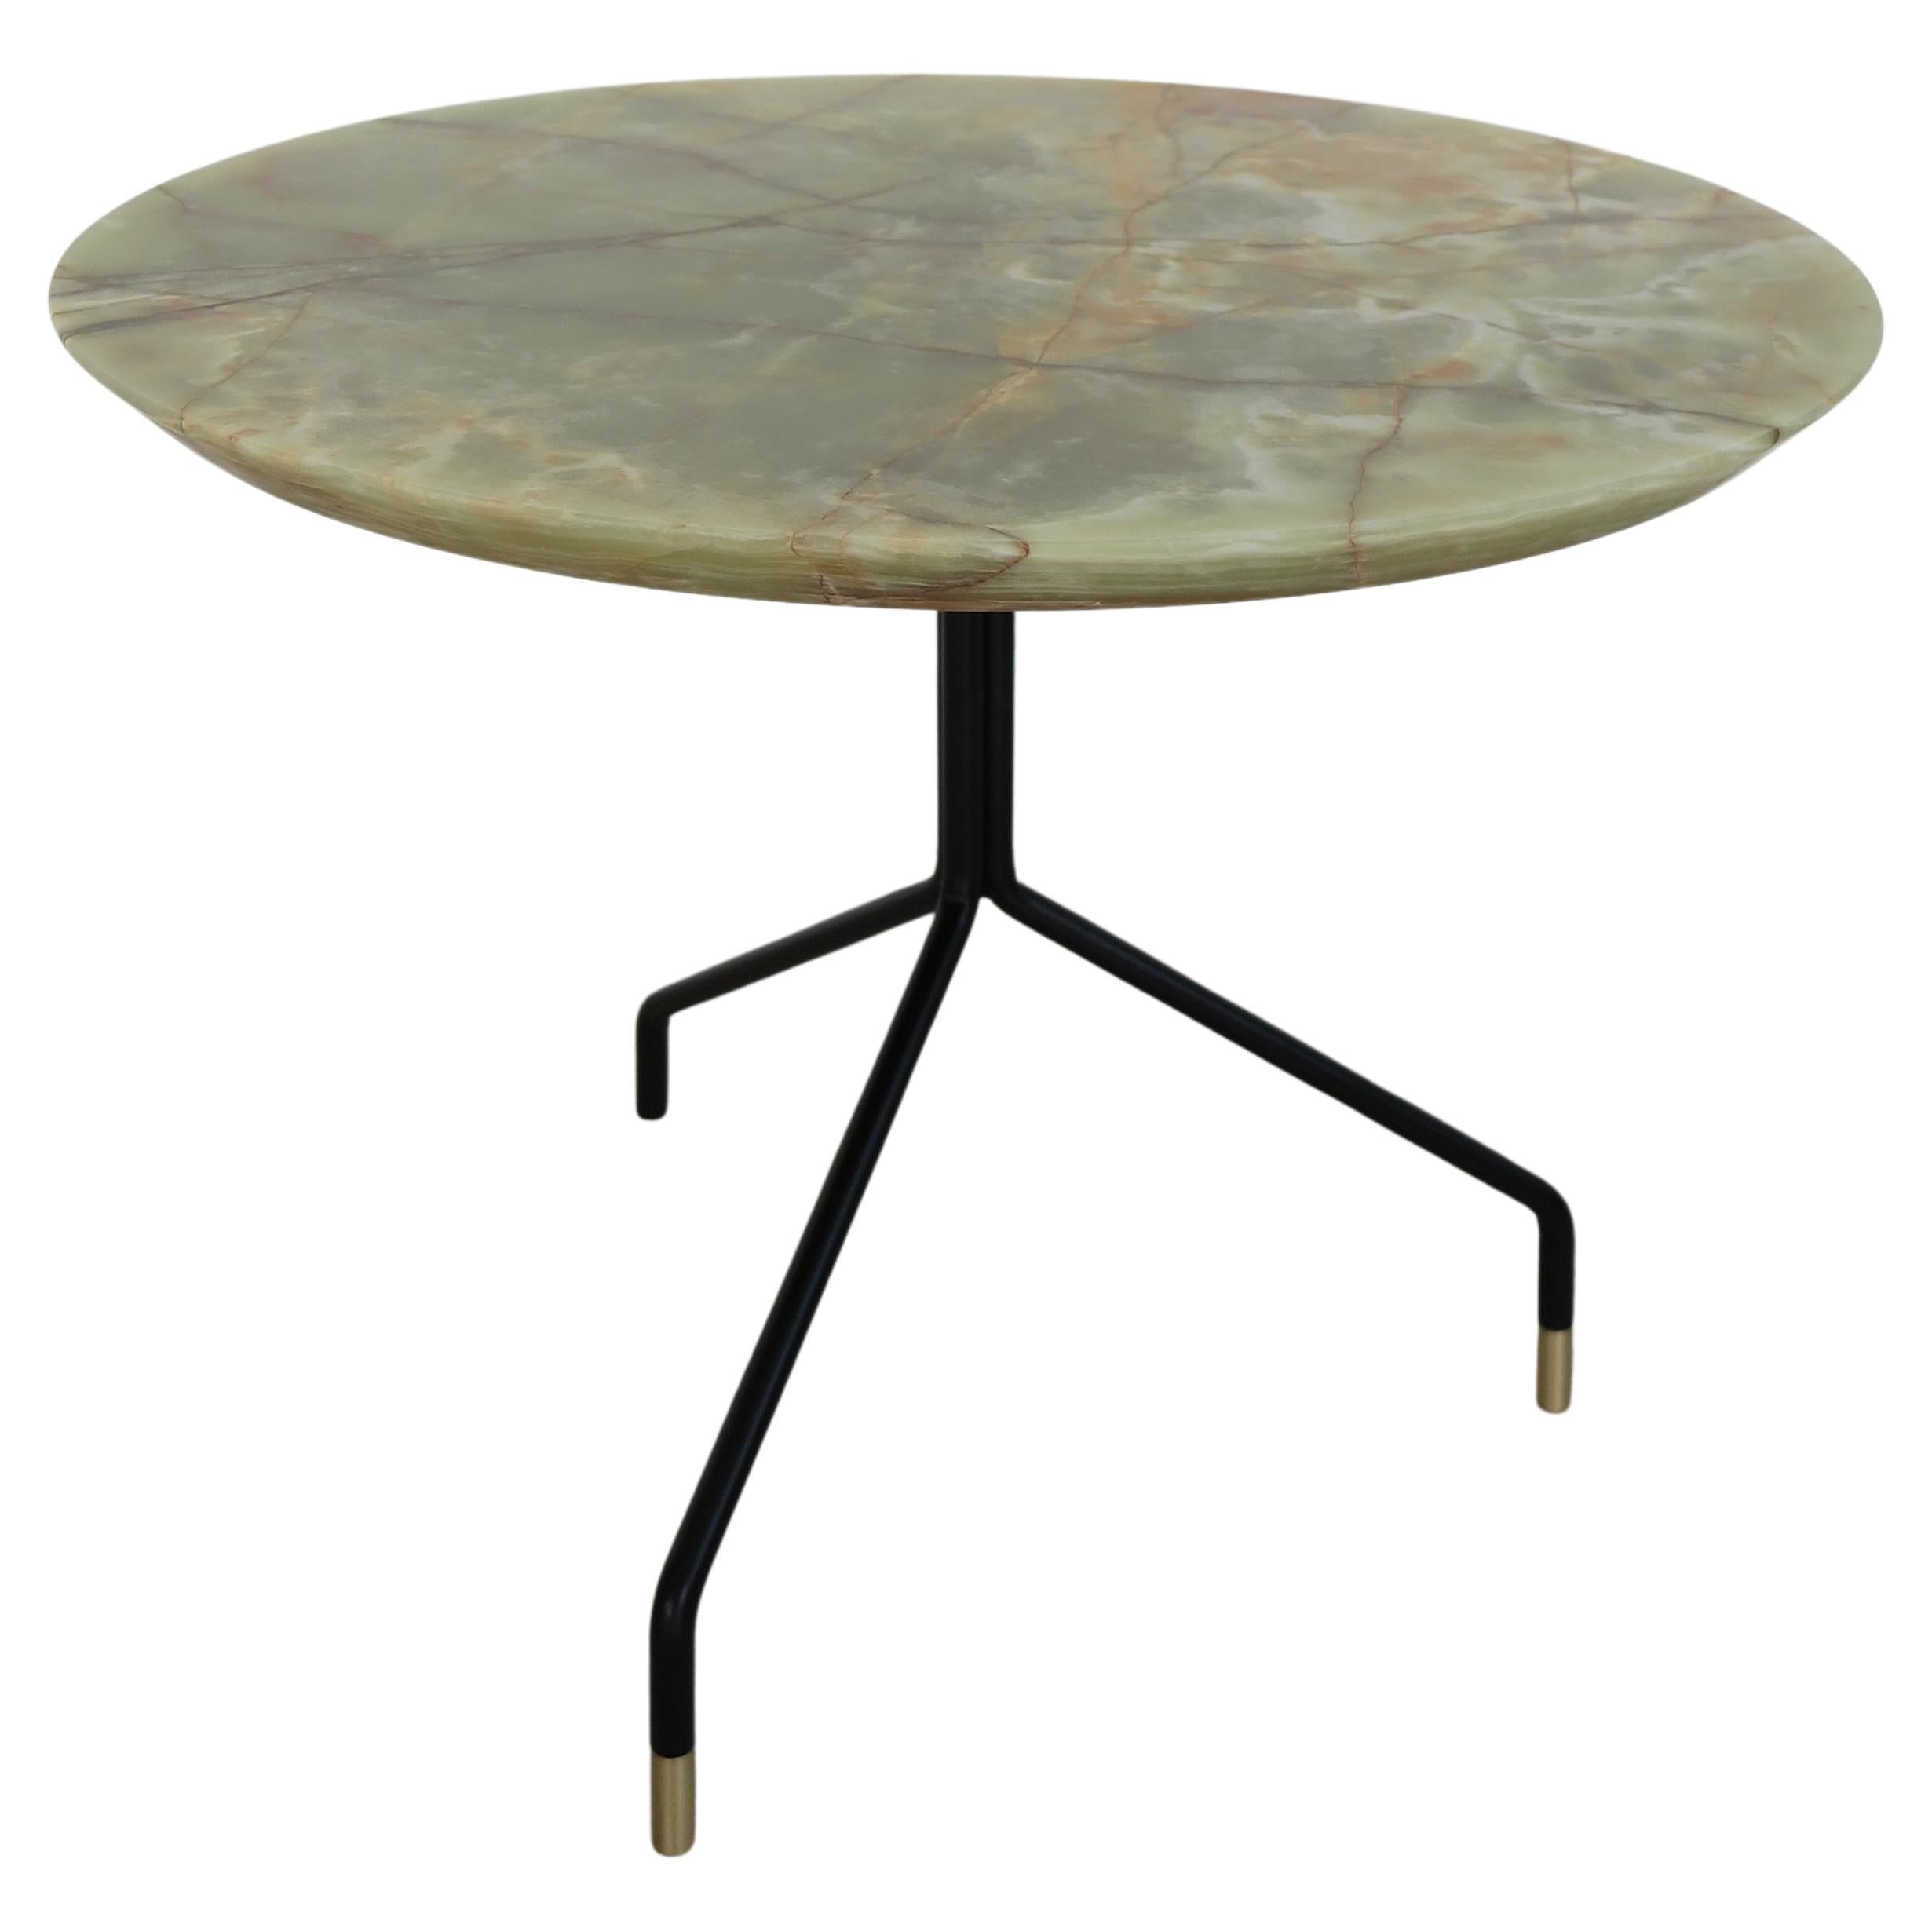 Italian Contemporary Round Onyx Marble Coffee Table New Design Capperidicasa For Sale